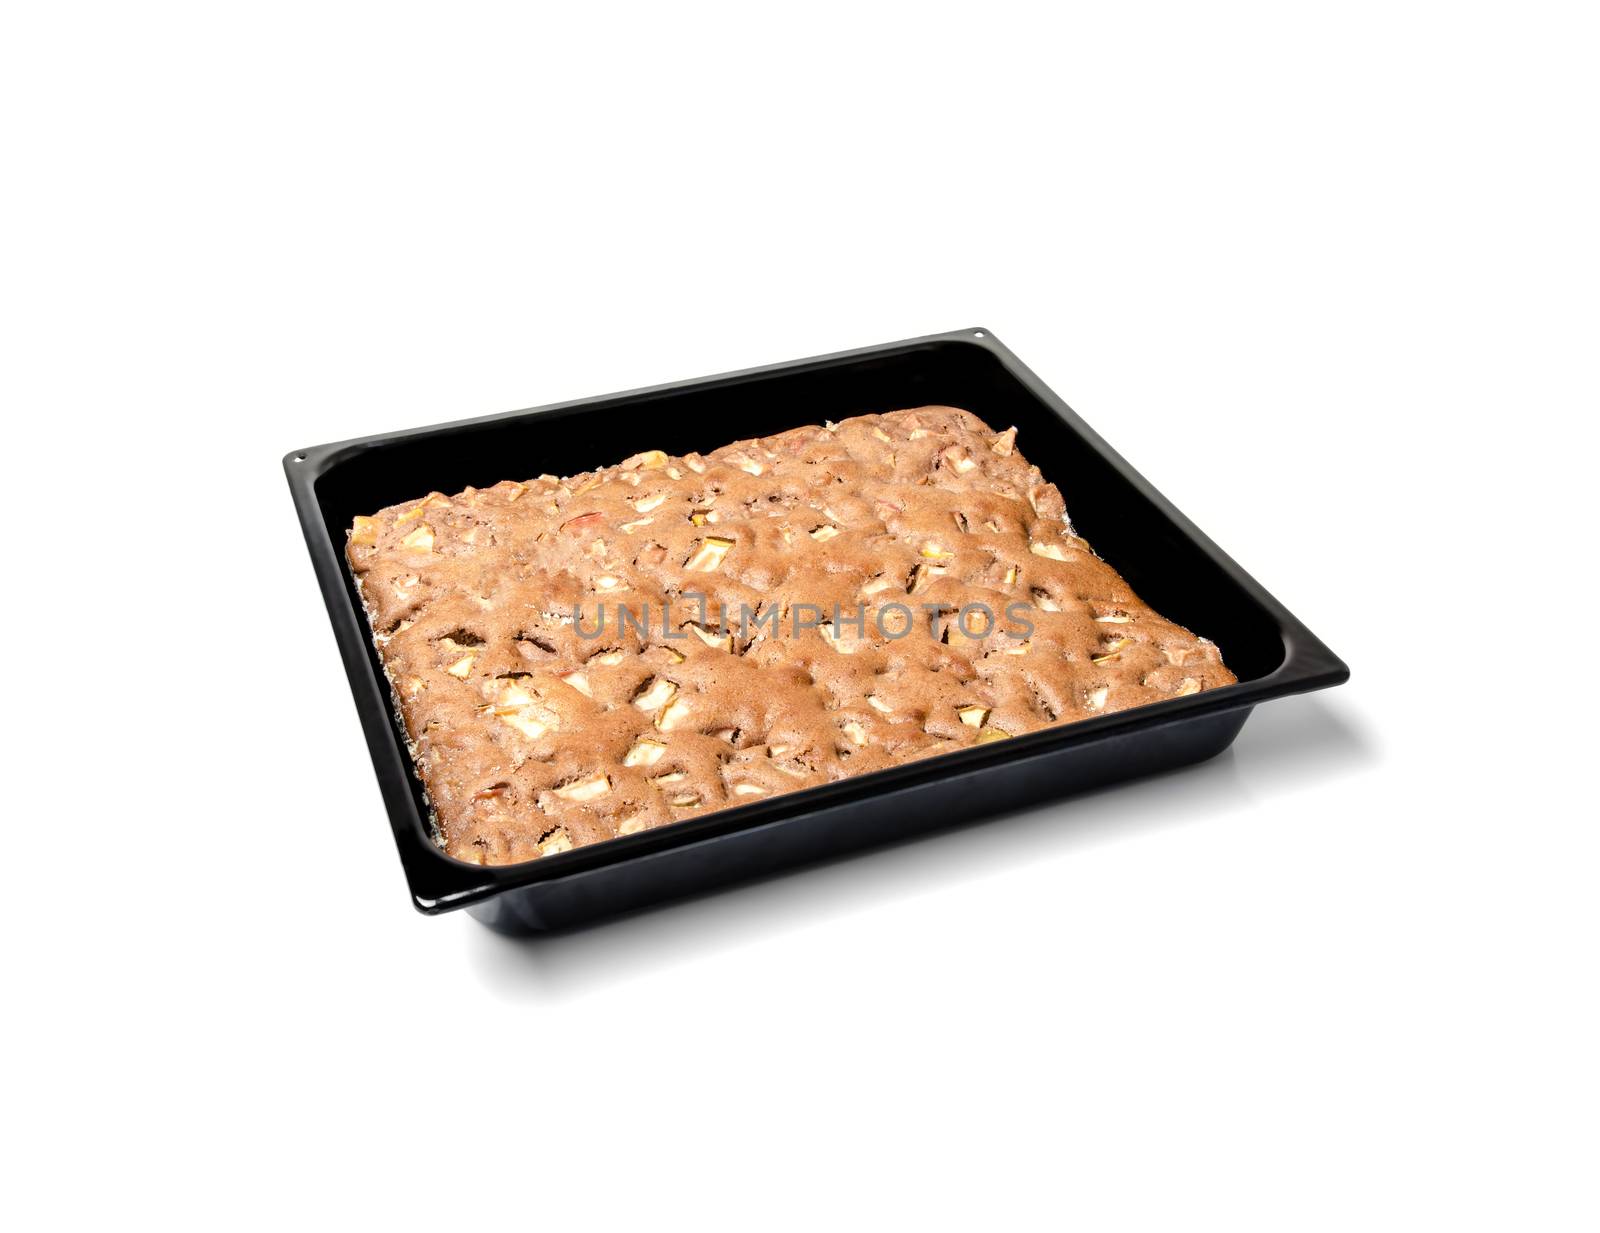 Apple pie on a black metal plate isolated on white background.